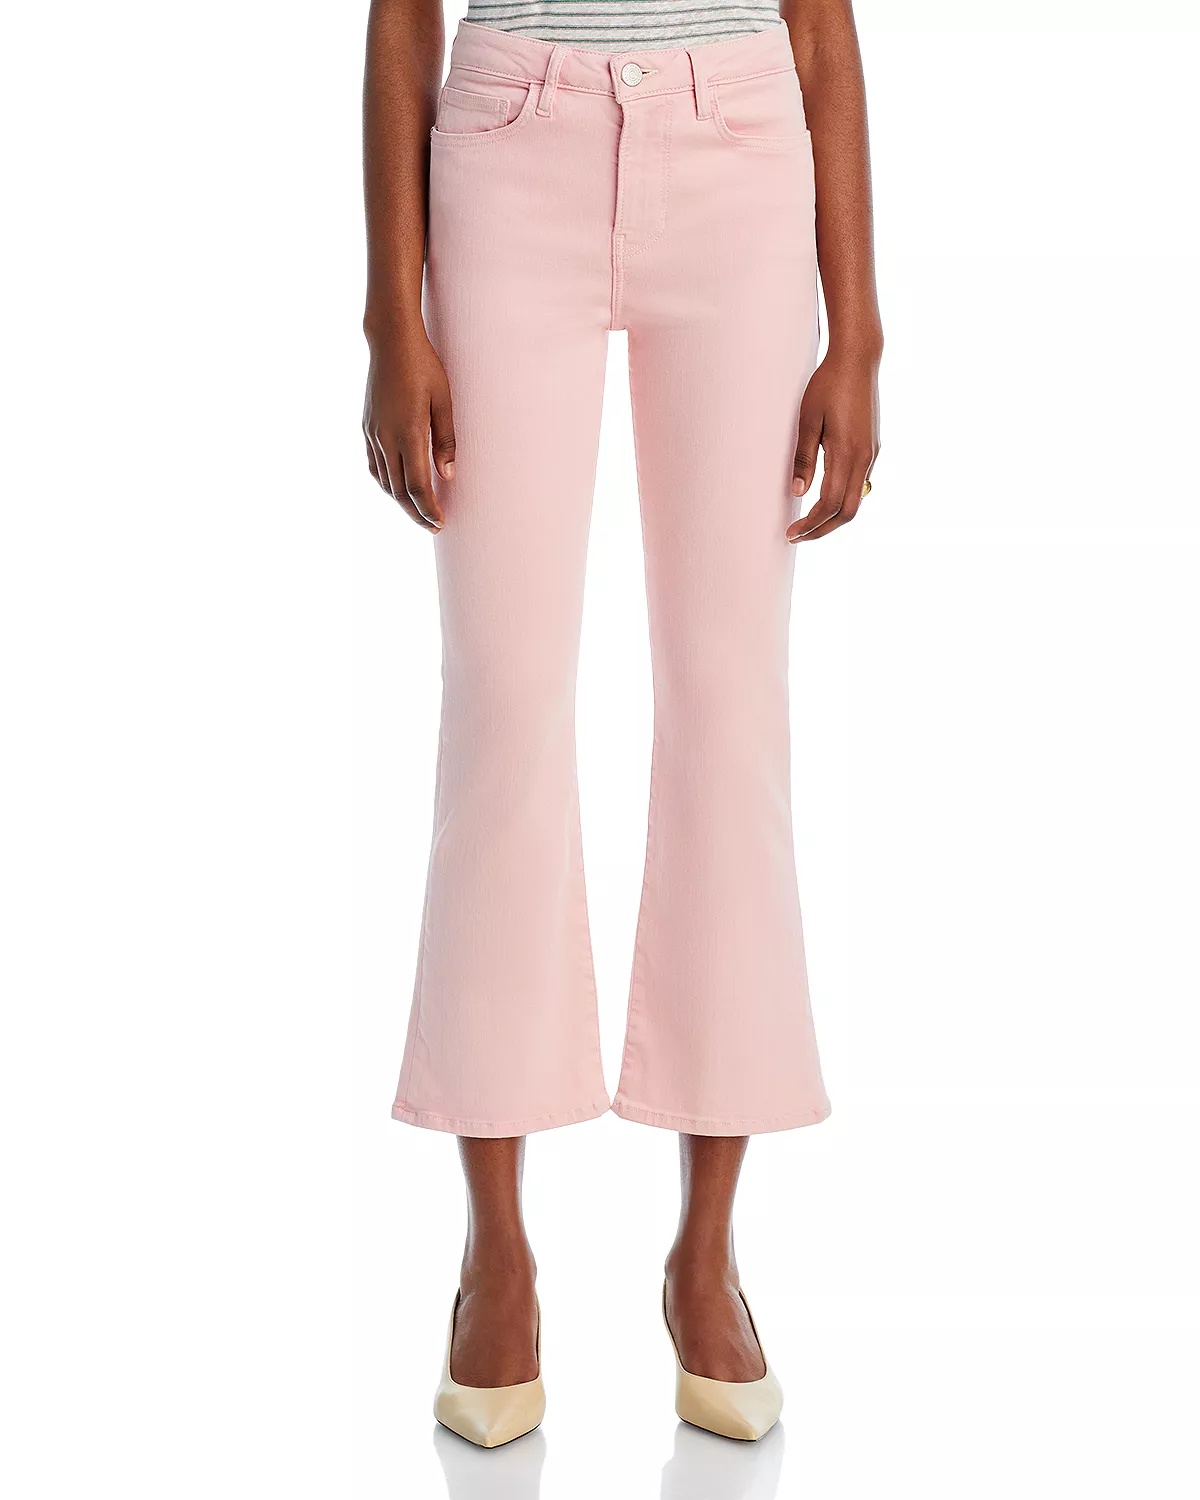 Le Crop High Rise Cropped Mini Bootcut Jeans in Washed Dusty Pink - 7